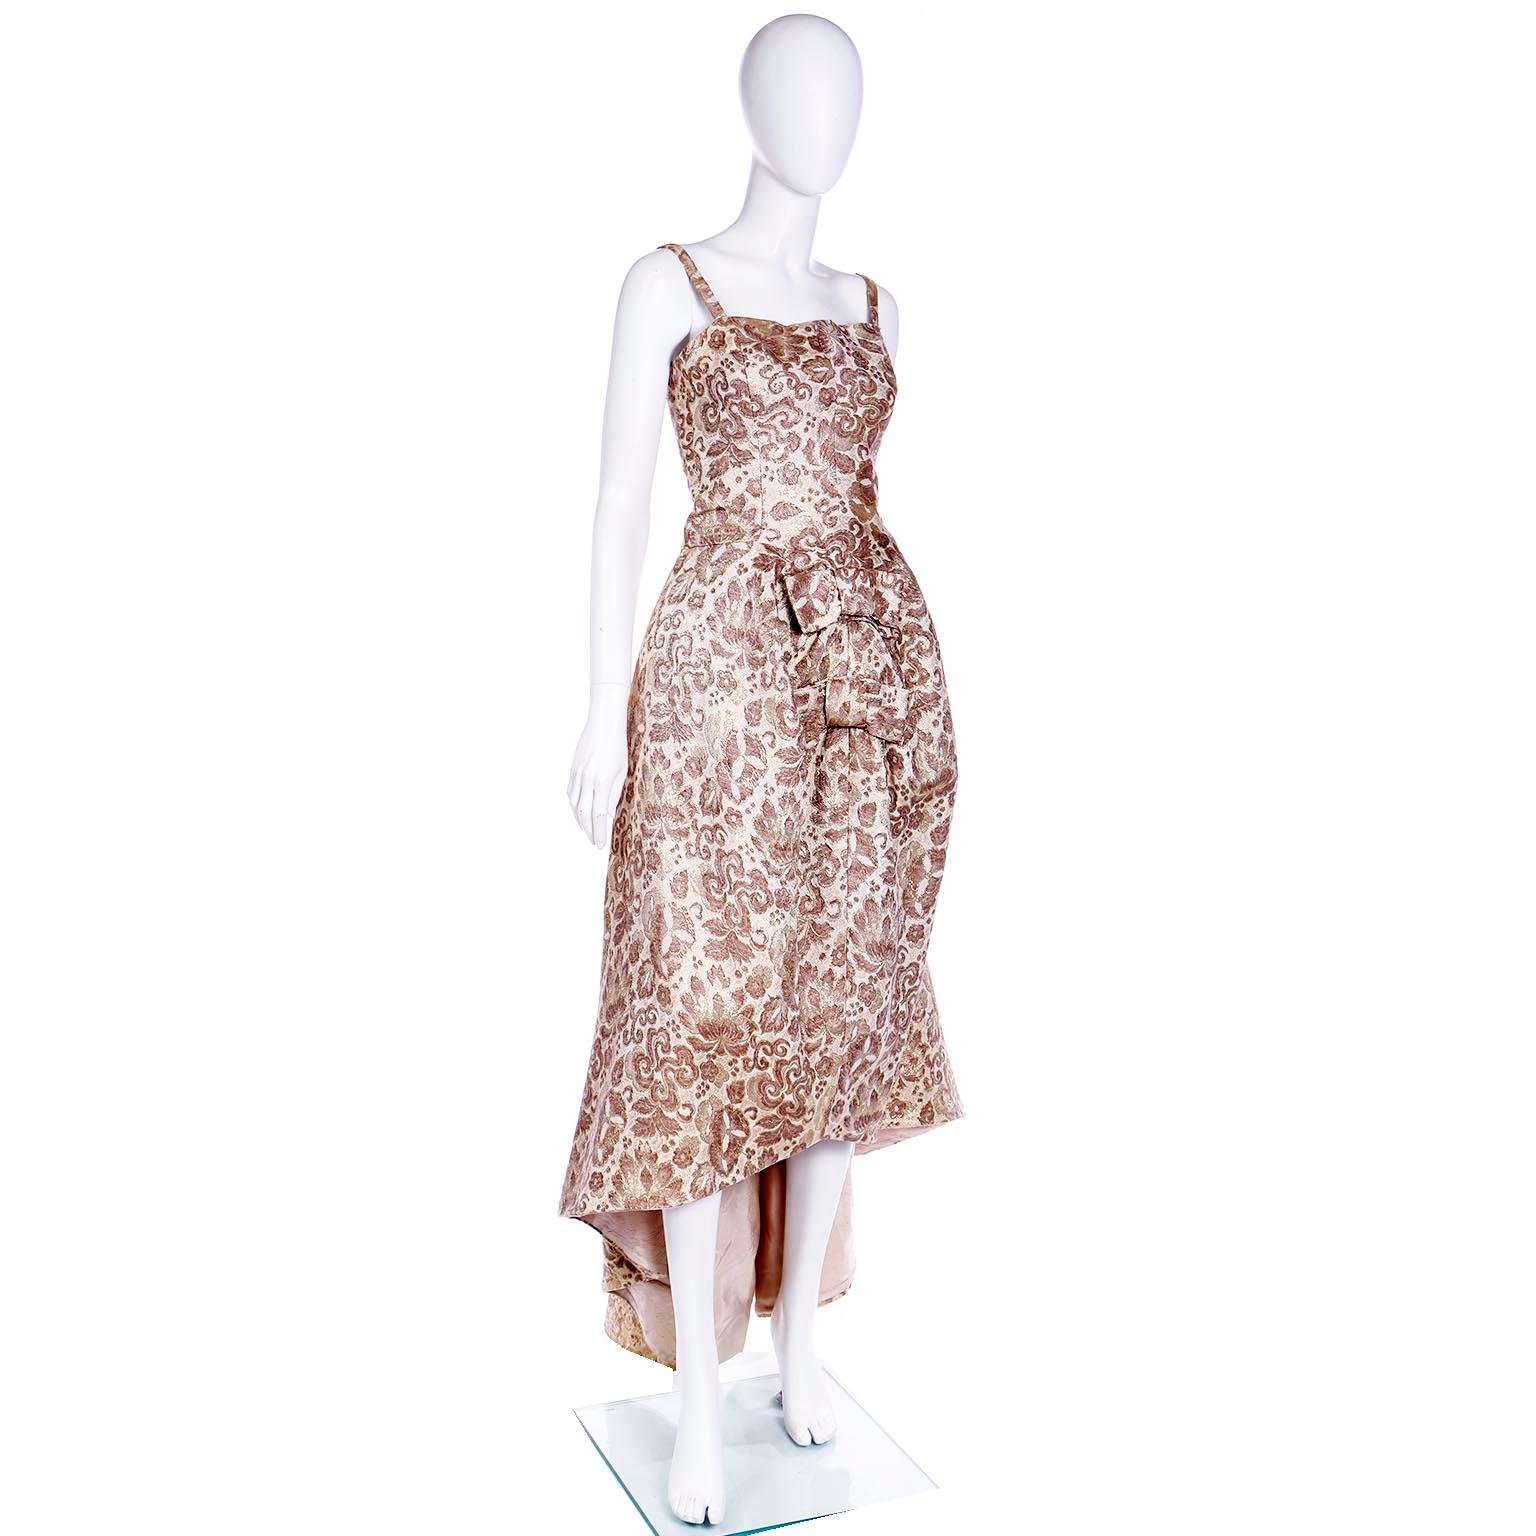 1950s Bronze Gold Metallic Jacquard High Low Evening Dress With Bows In Excellent Condition For Sale In Portland, OR